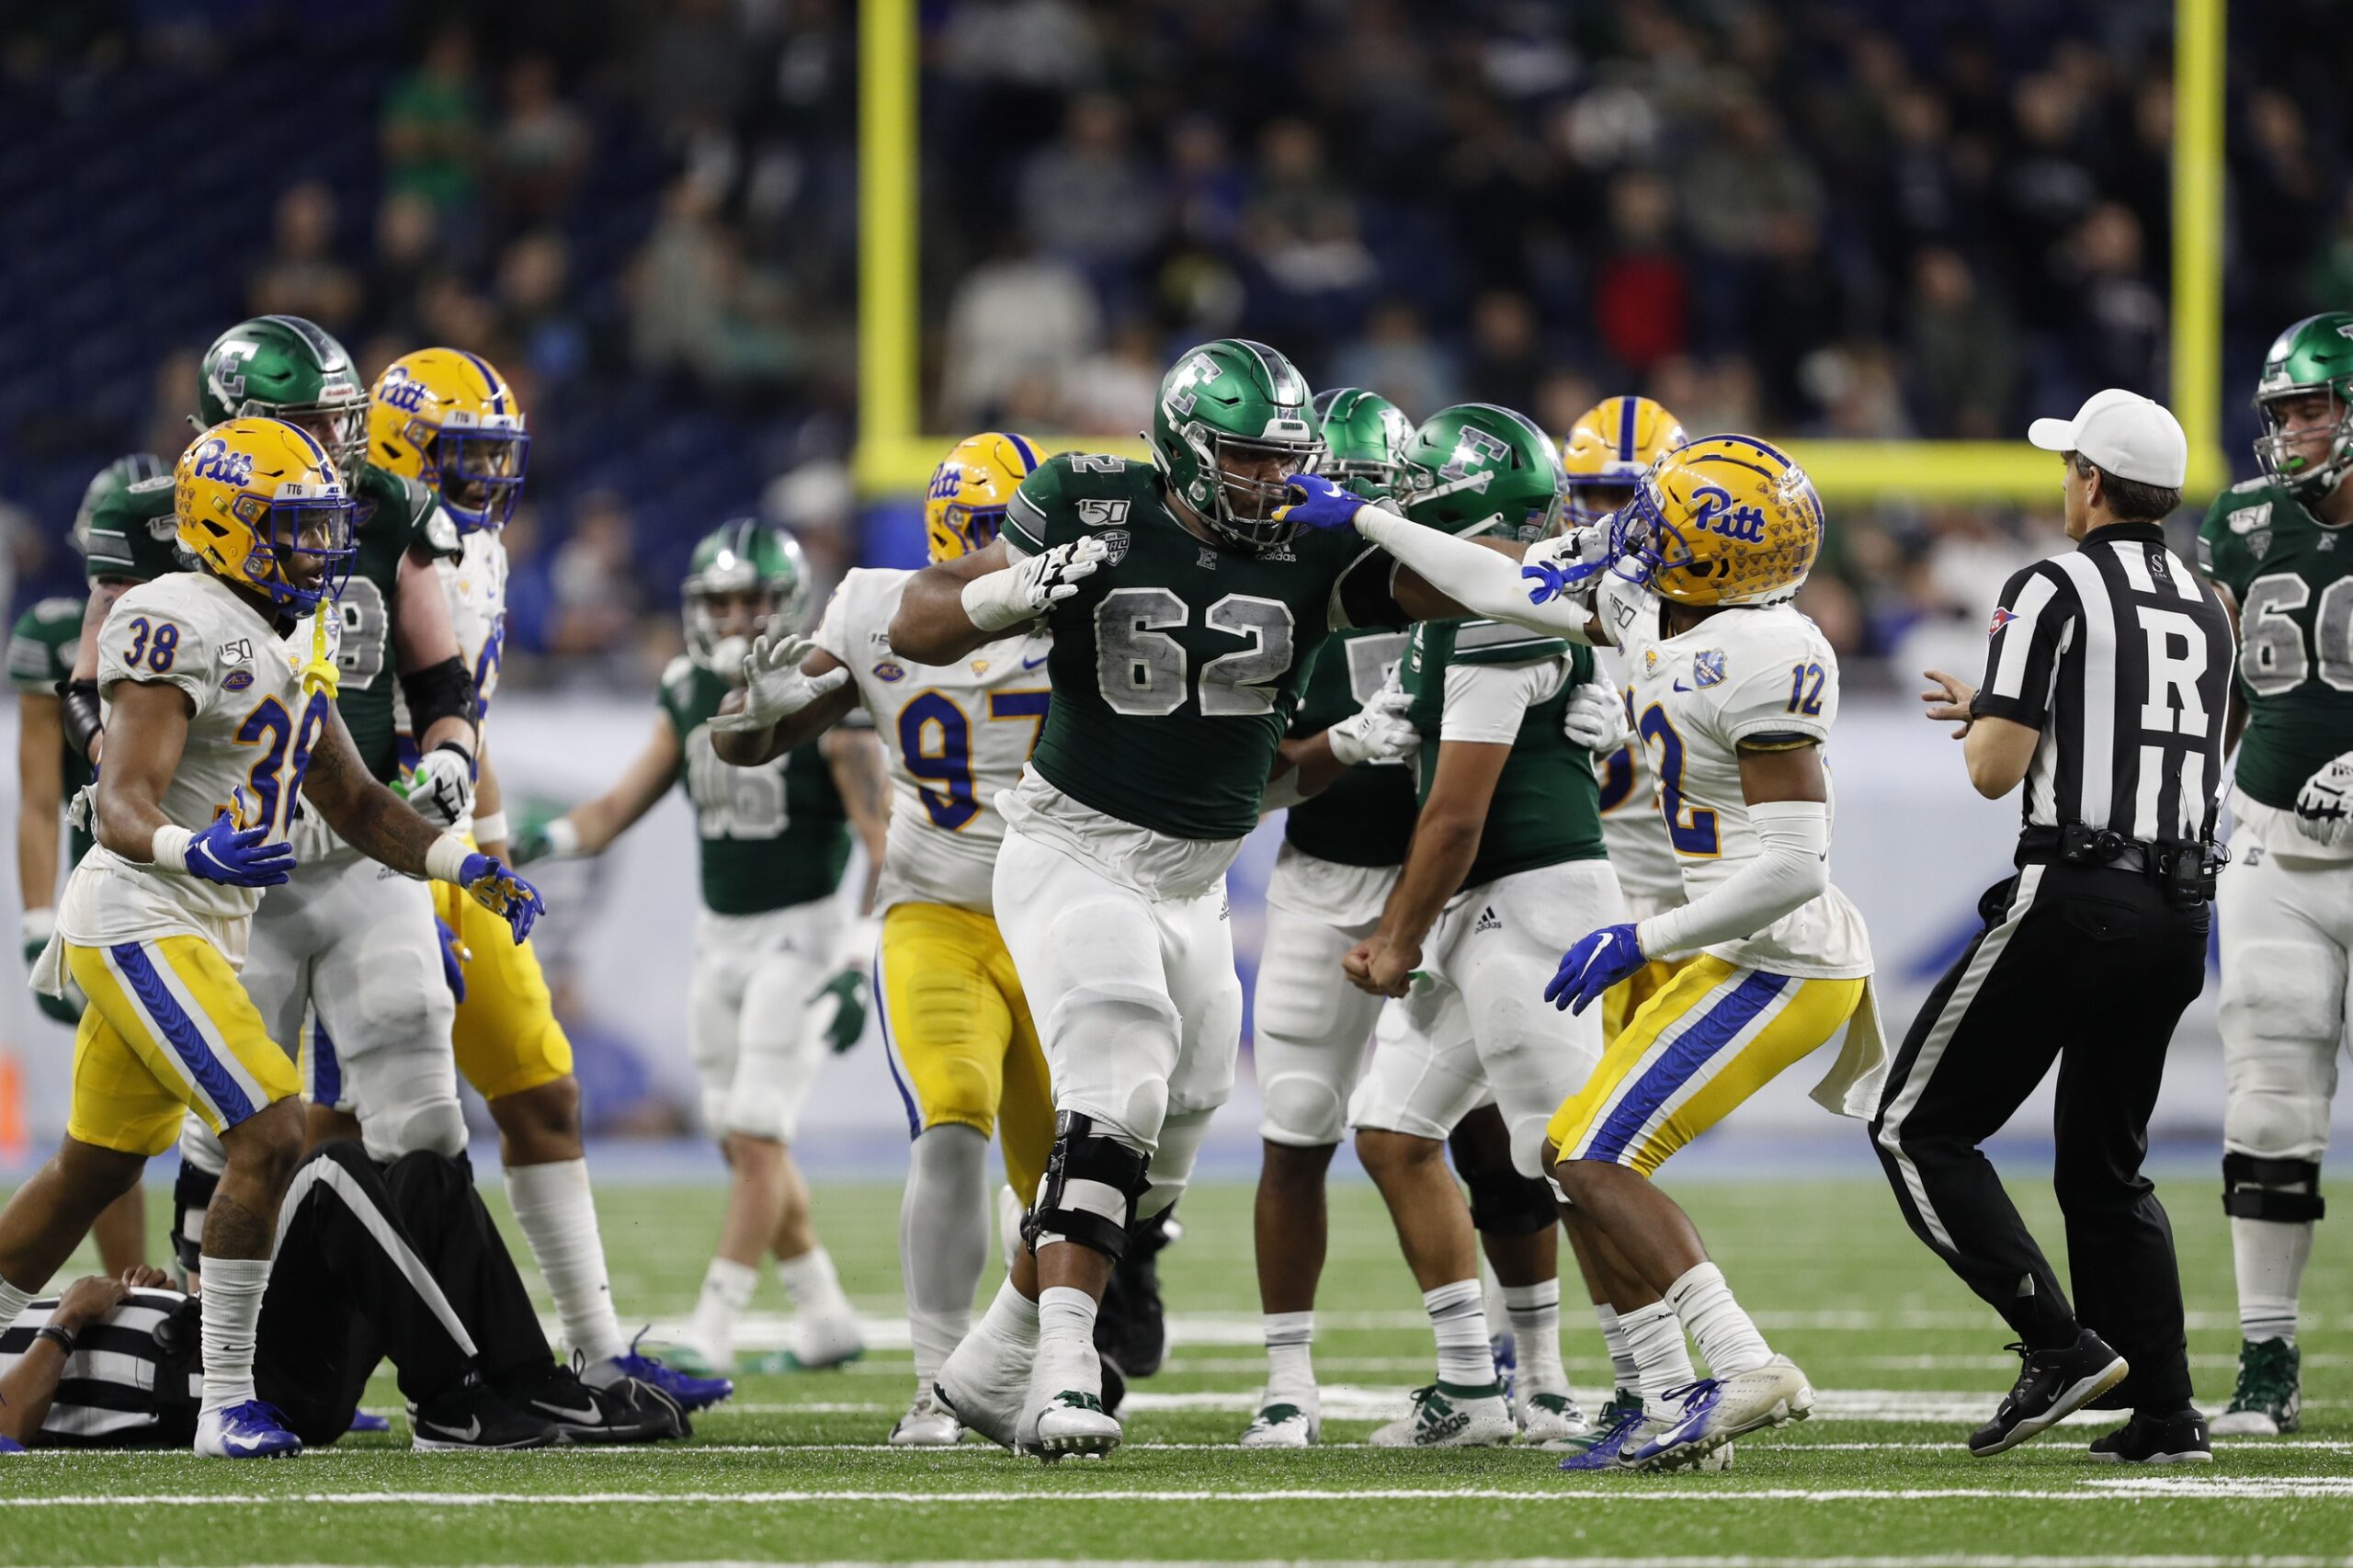 Eastern Michigan 2023 NFL Draft Scouting Reports Include Jose Ramirez and  Sidy Sow